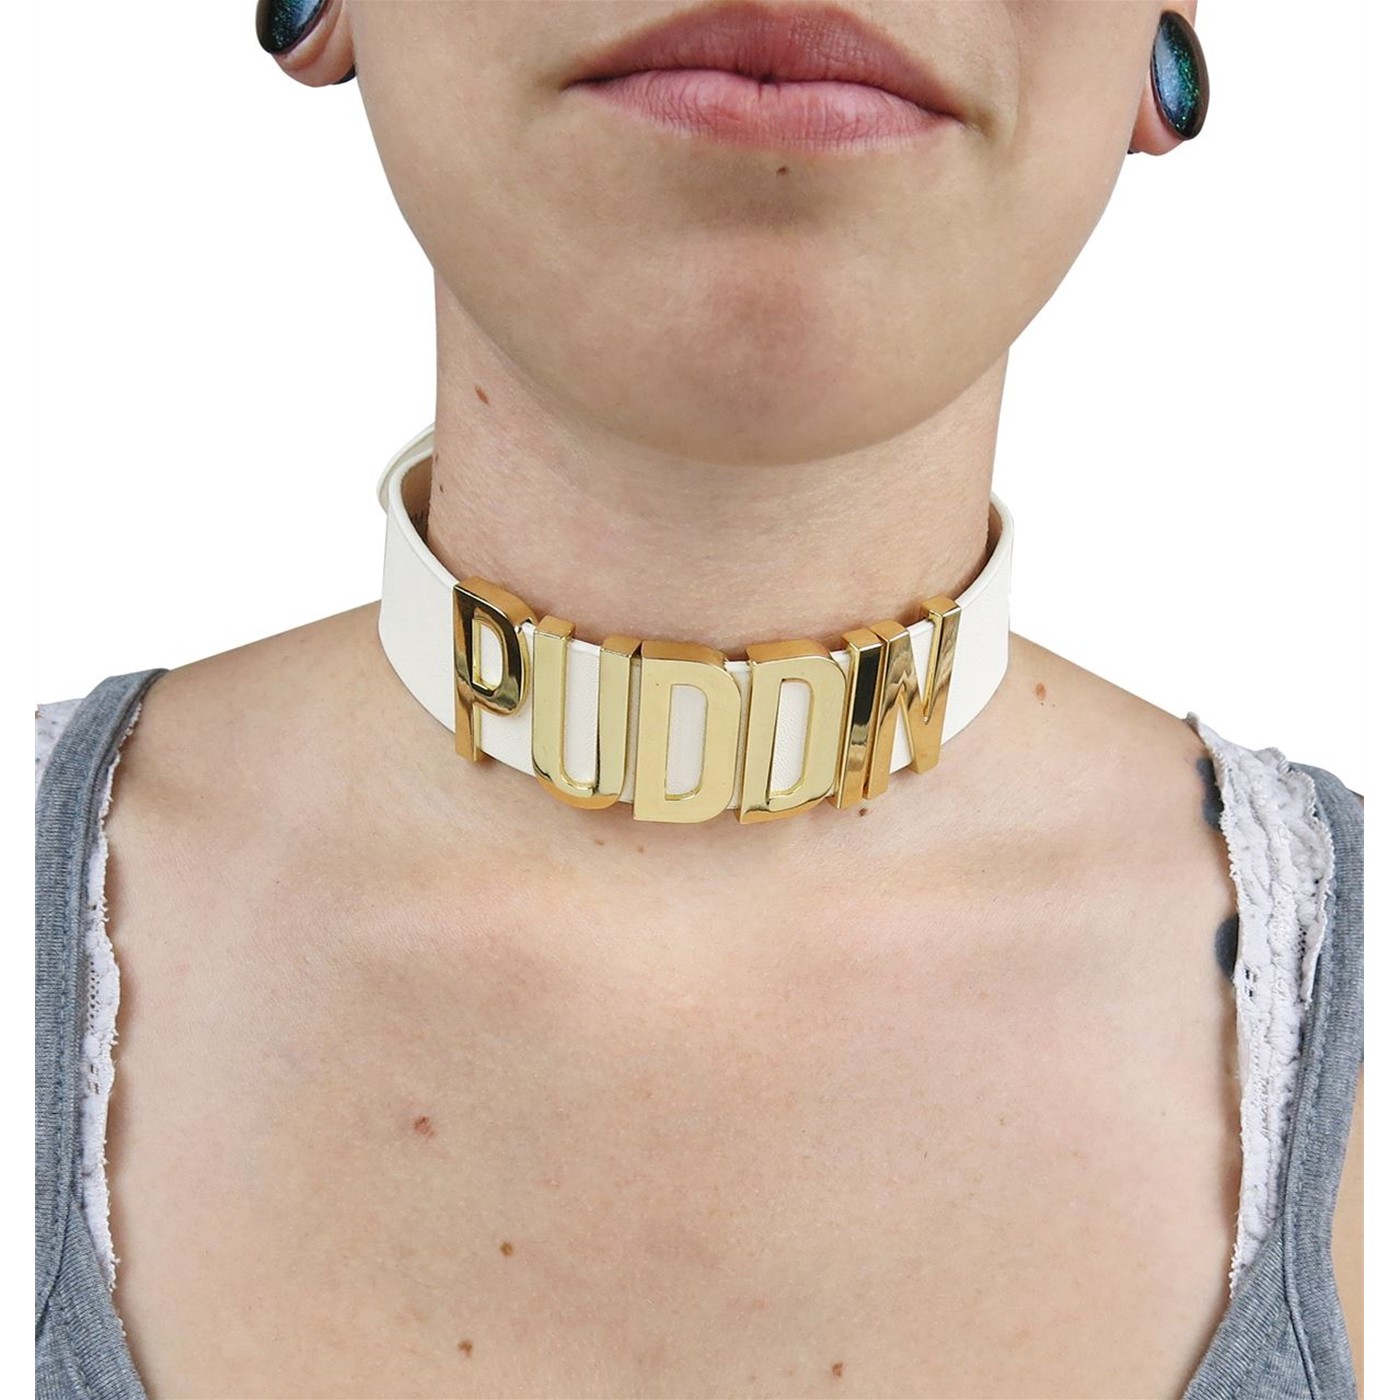 Suicide Squad Harley Quinn Puddin Choker